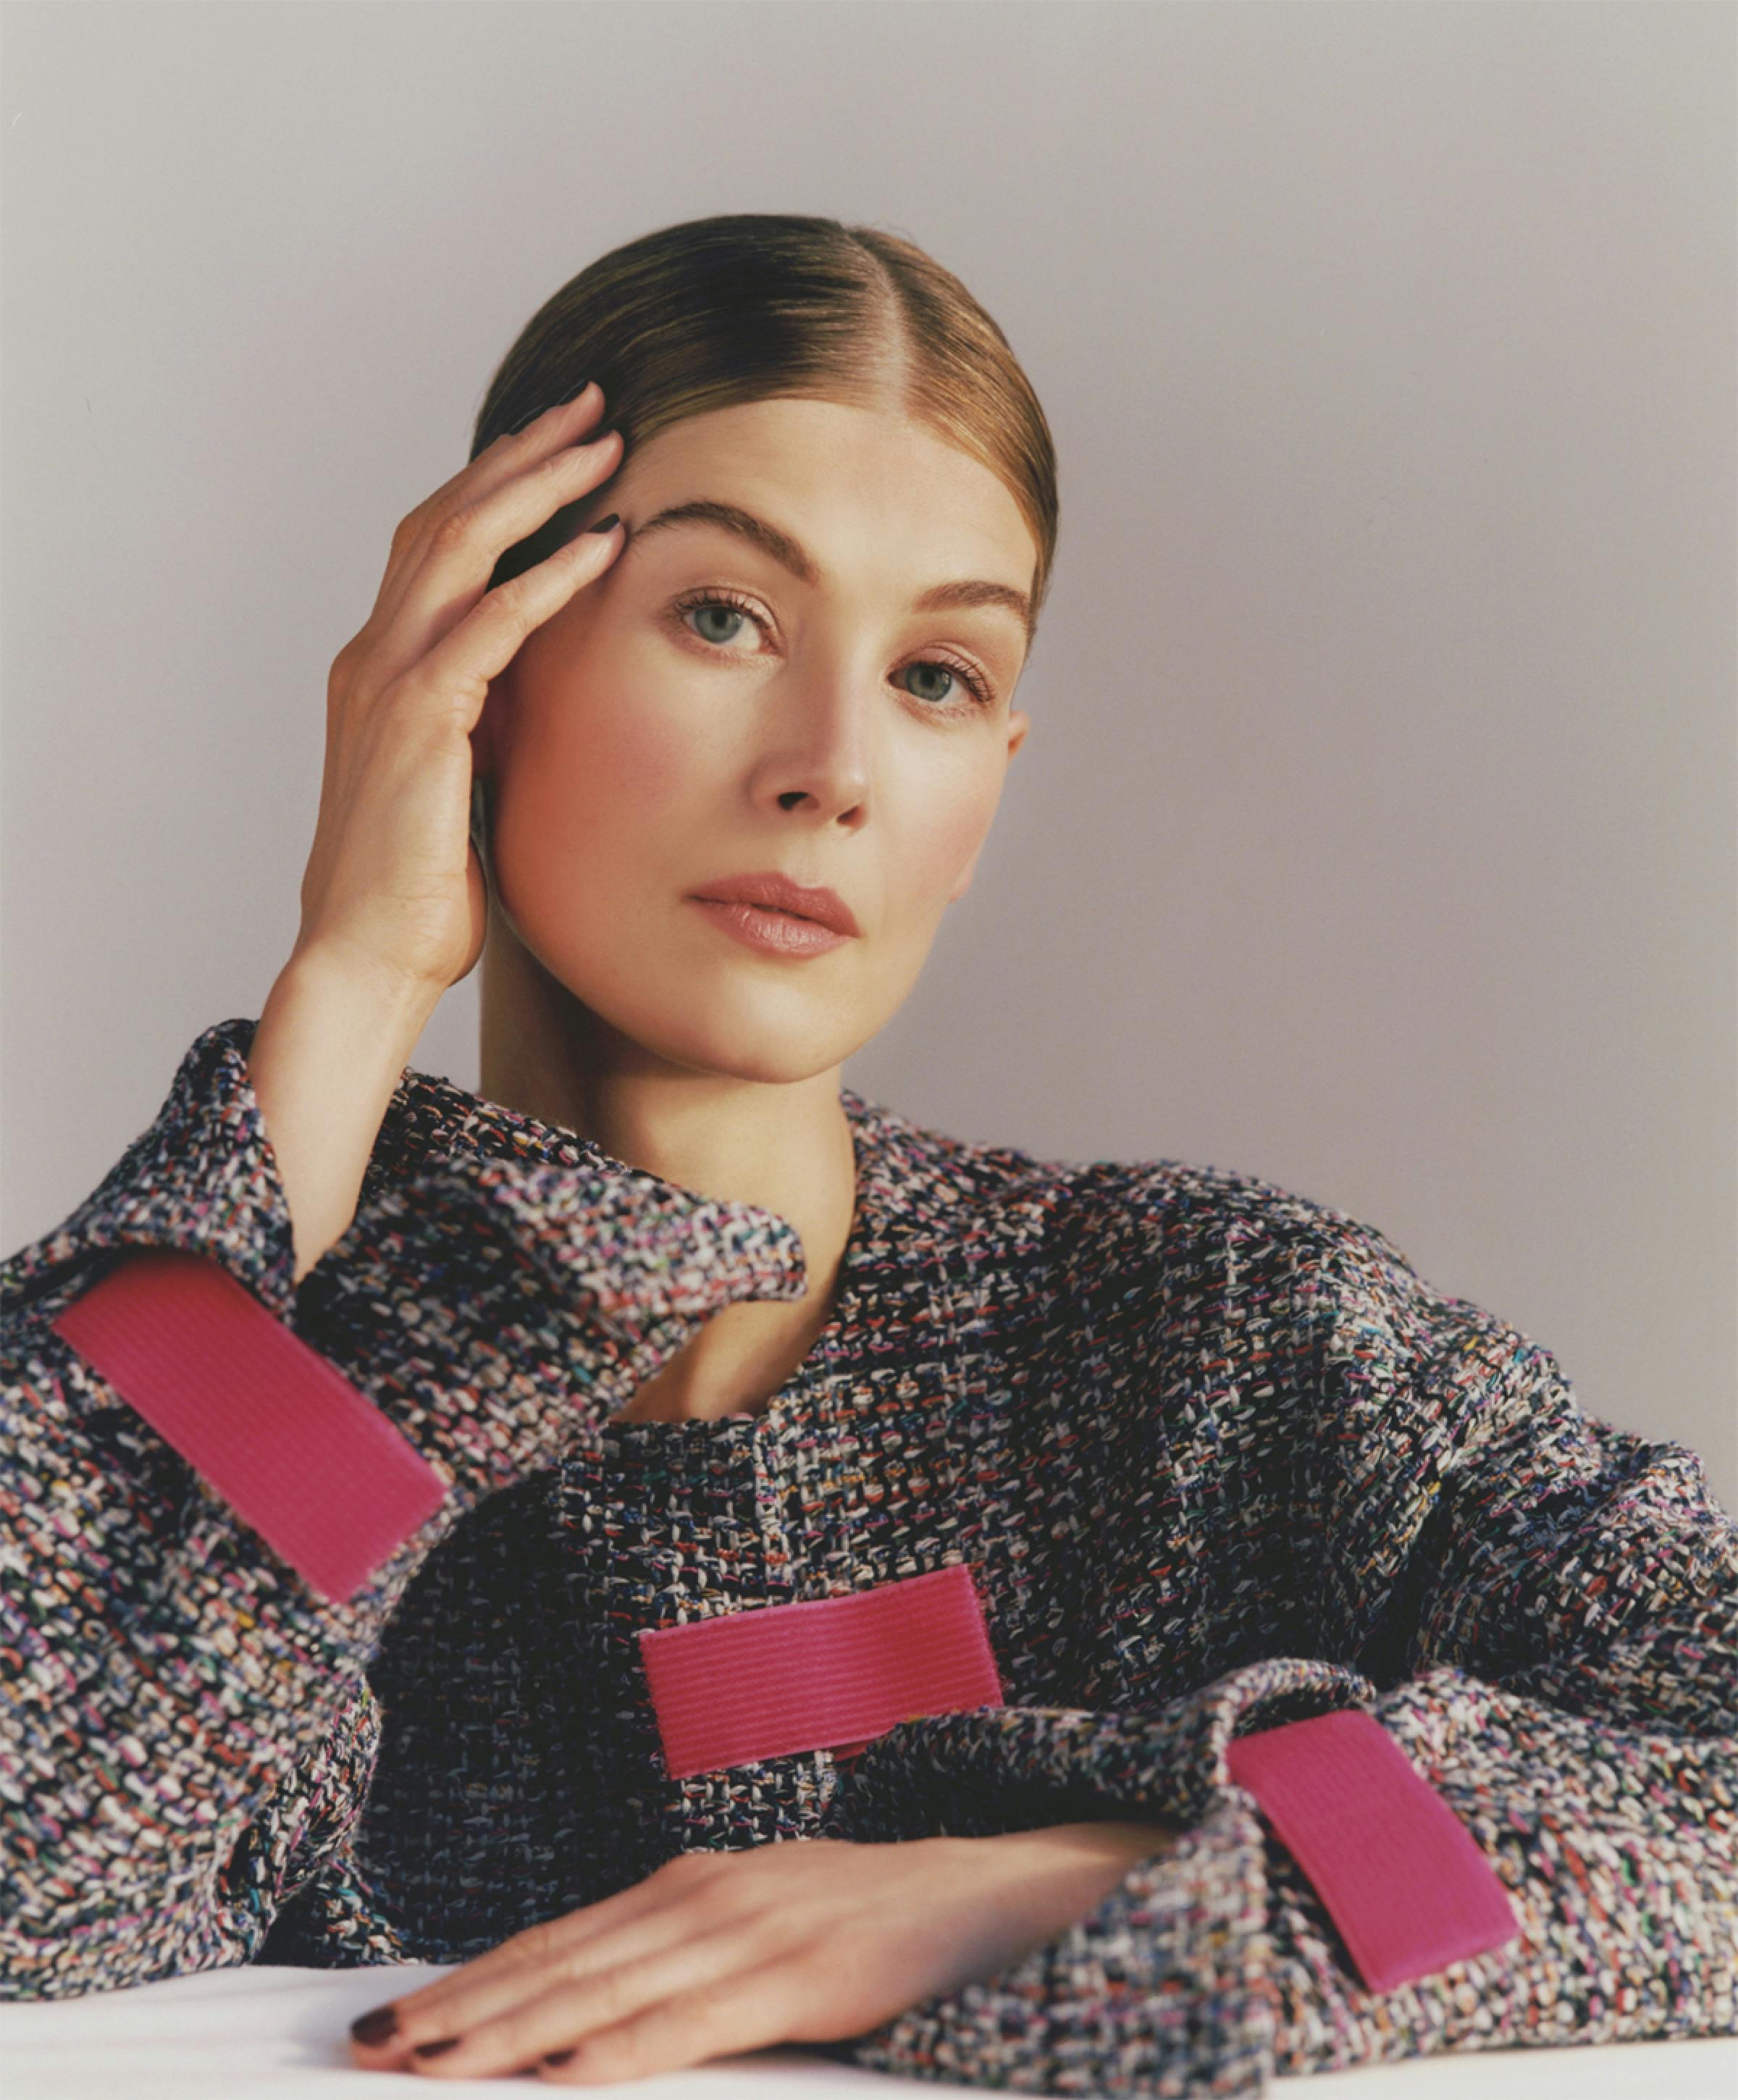 A portrait of Rosamund Pike wearing a tweed jacket with red accents on the cuffs and pocket. Her hair is pulled tightly back and parted down the center. She leans her head delicately on one hand.